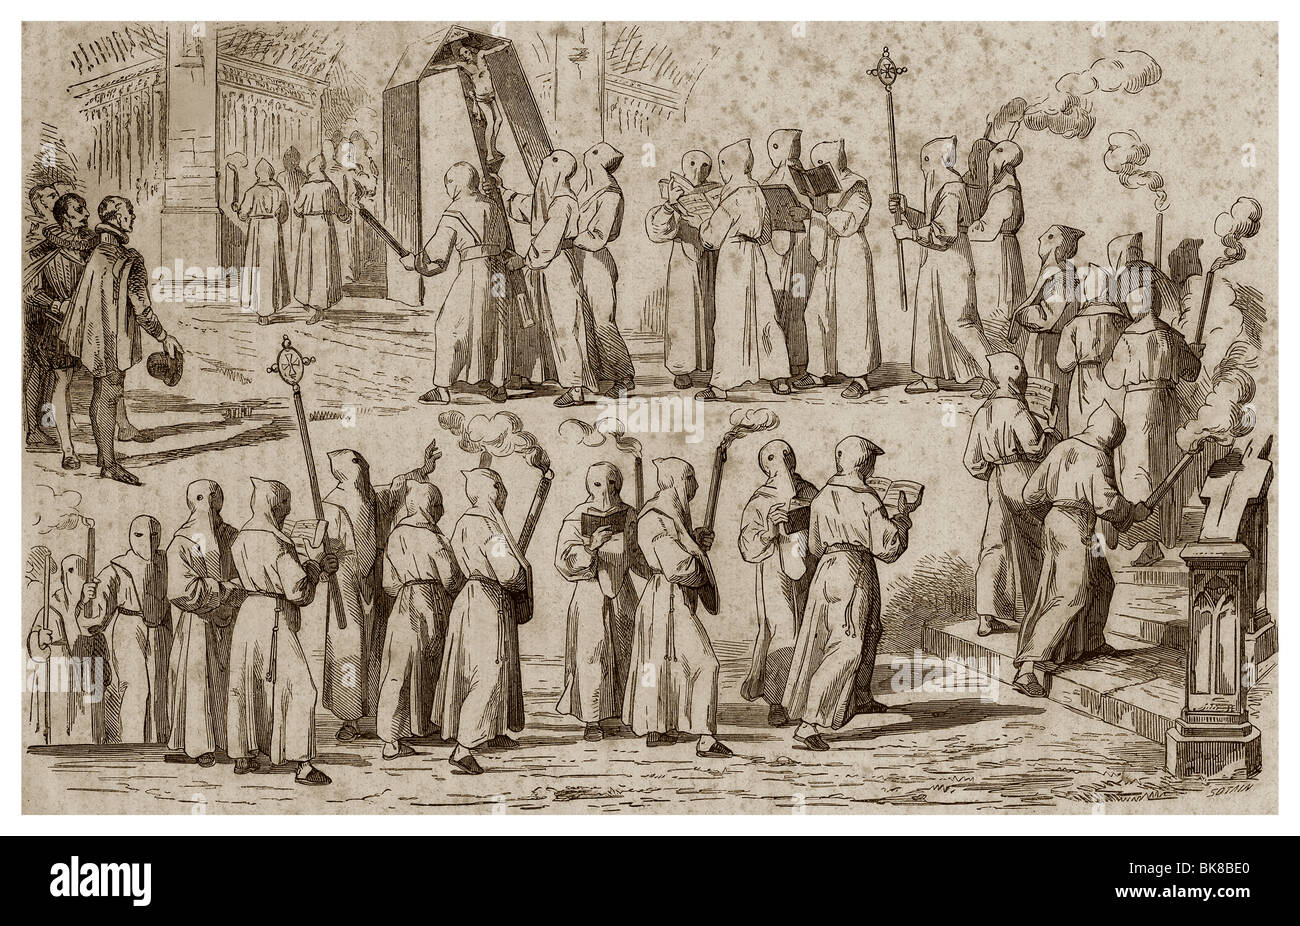 On Friday 28th March 1583, procession of the white penitents during Henry III of France's reign. Stock Photo